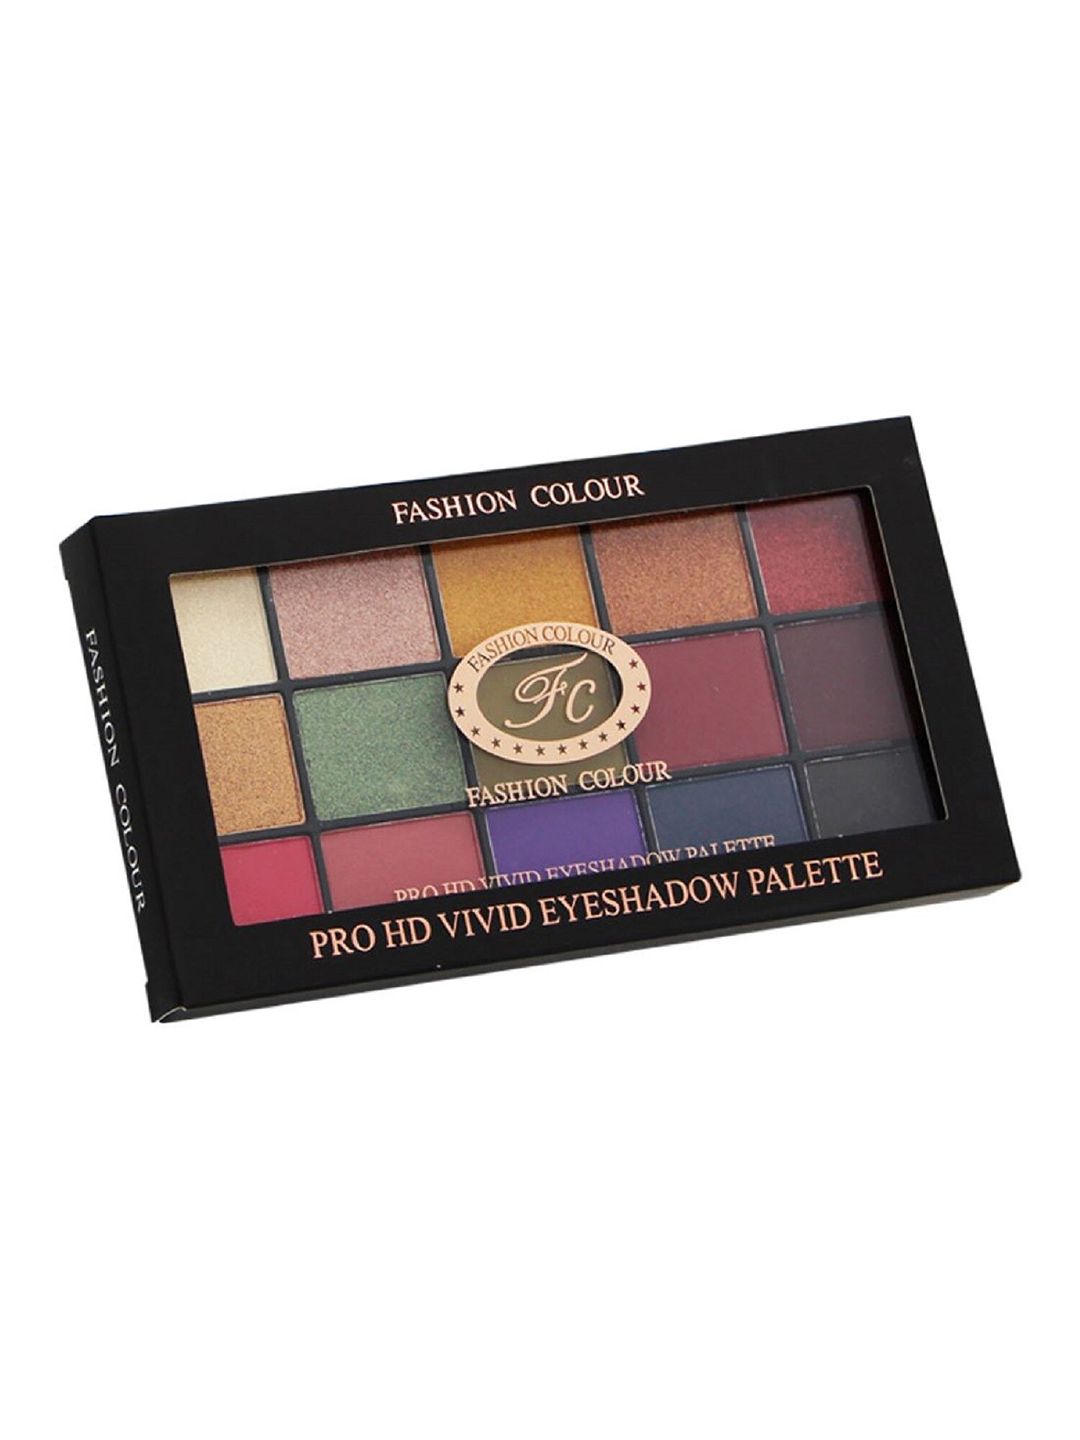 Fashion Colour 15 Shades Pro HD Vivid Eyeshadow Palette 18 g - Shade 03 Price in India